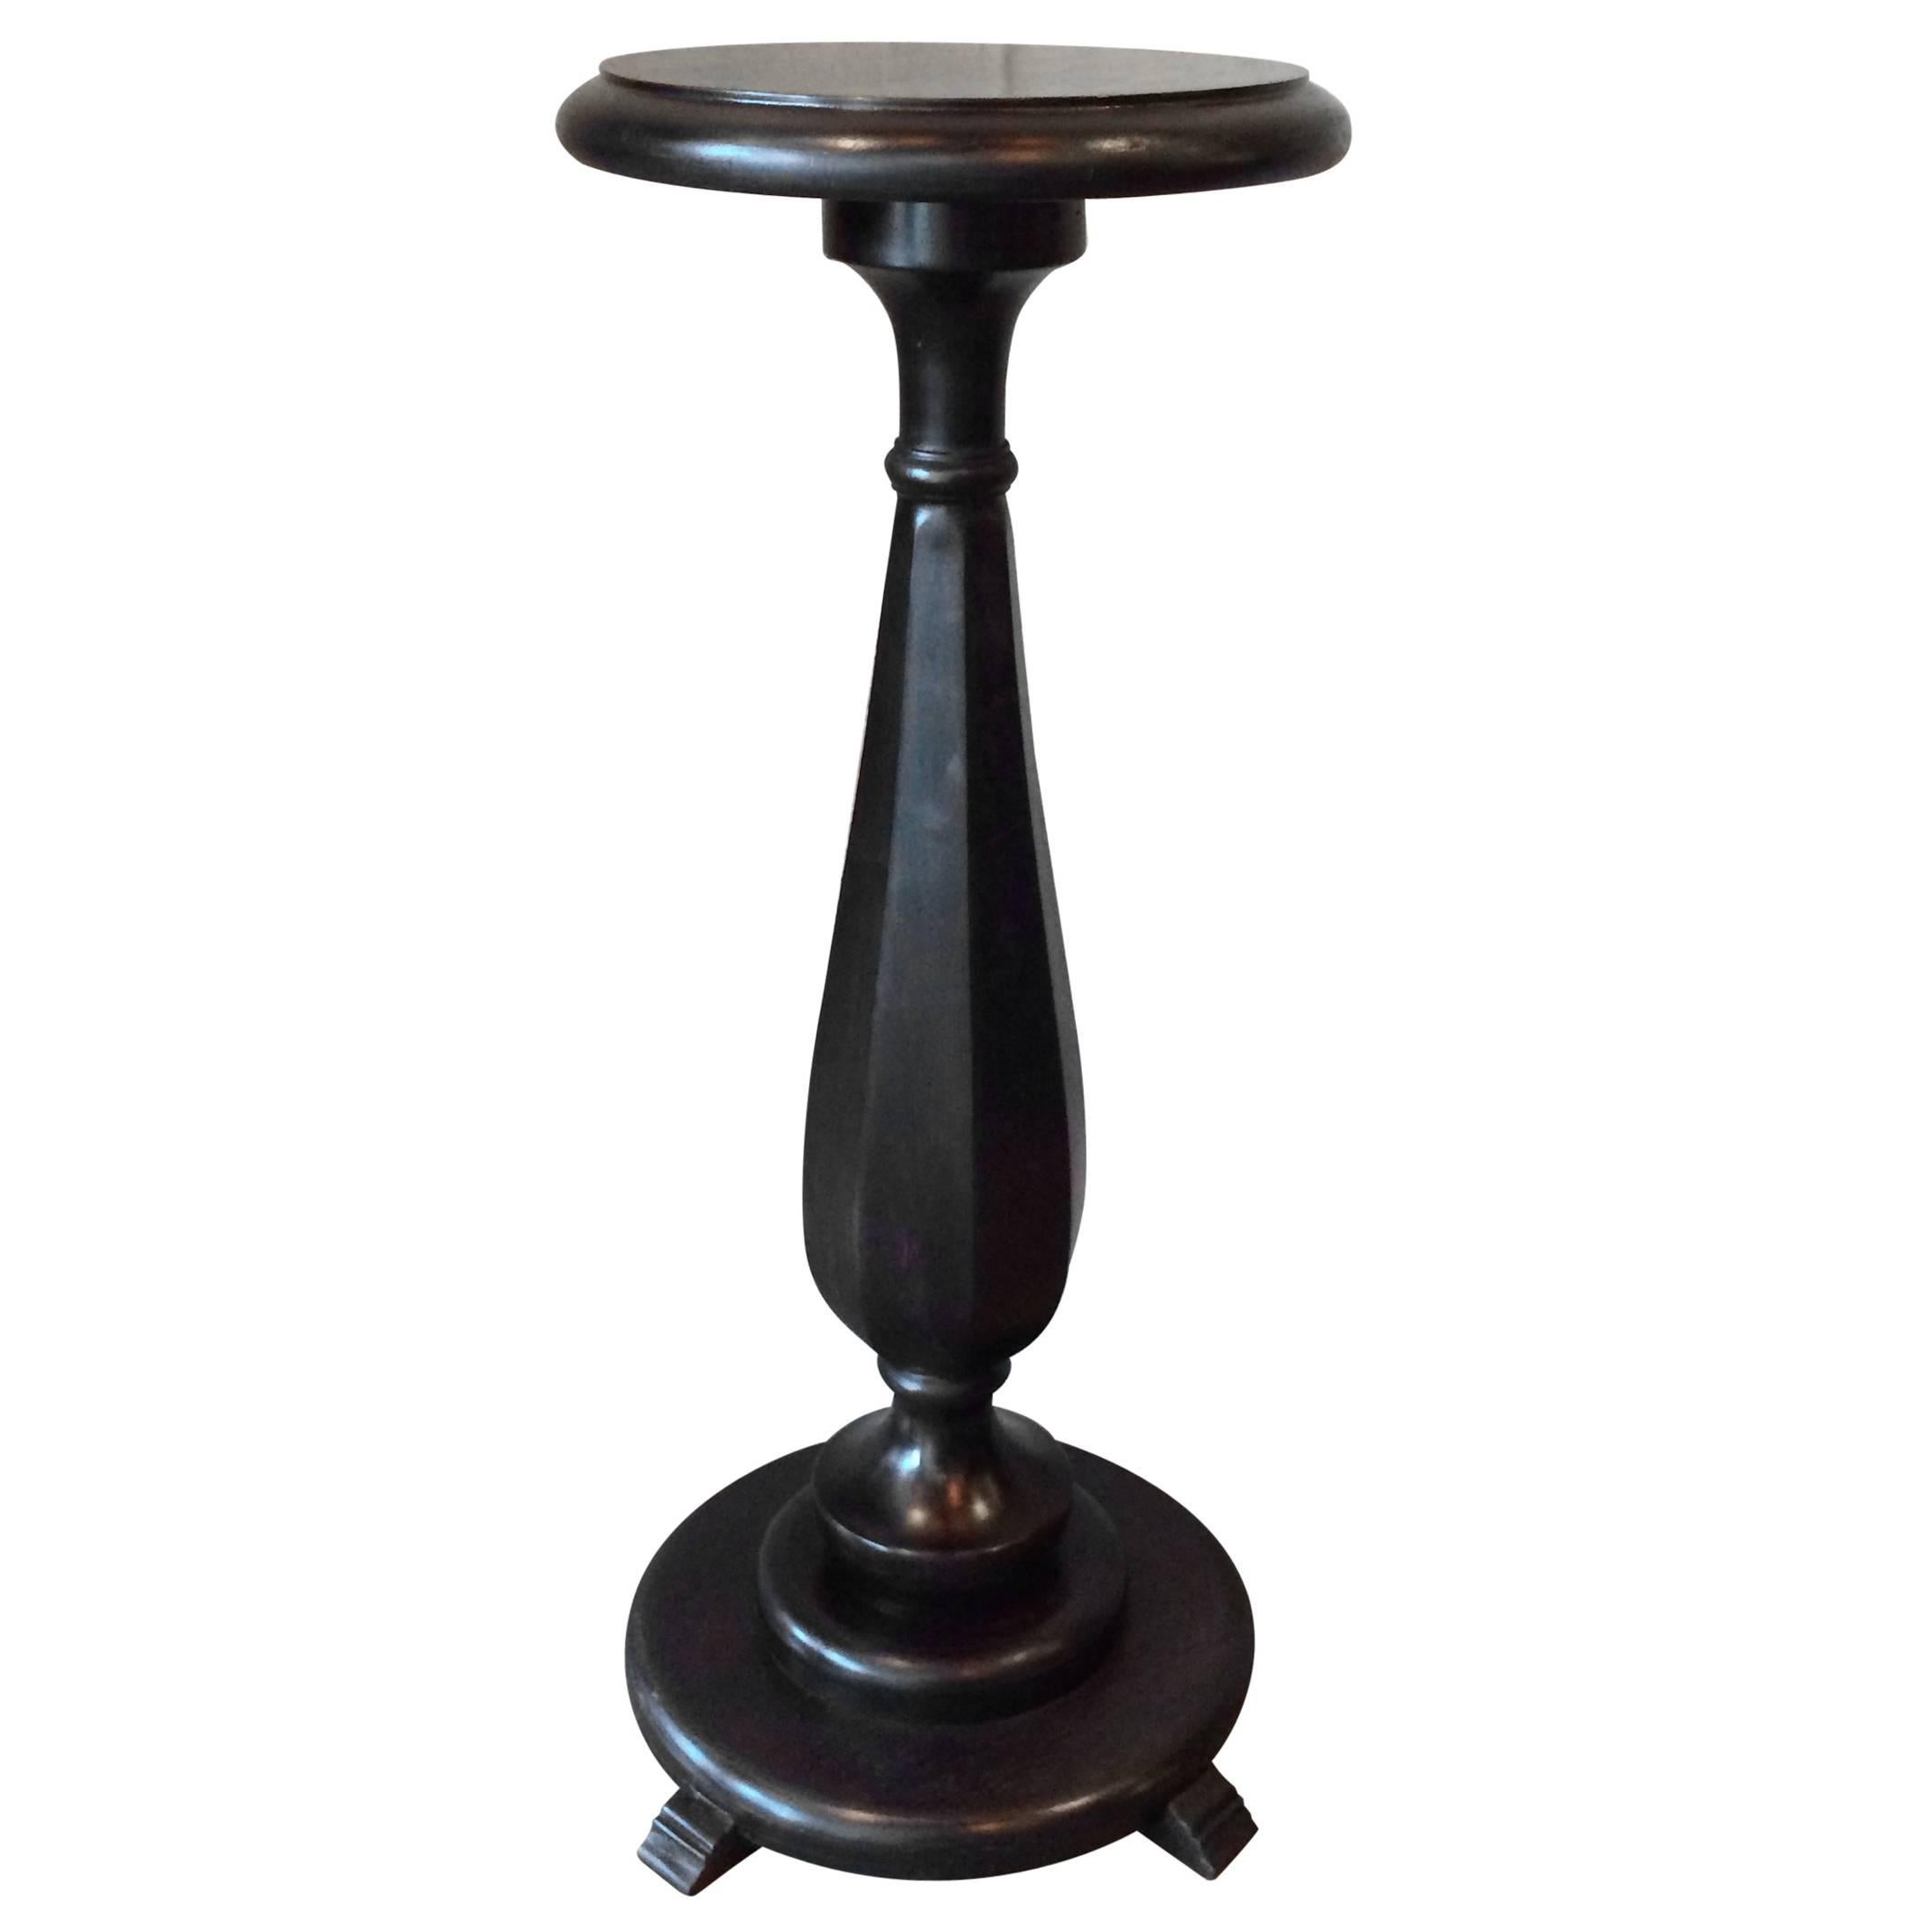 Late Victorian Ebonized Mahogany Pedestal or Plant Stand